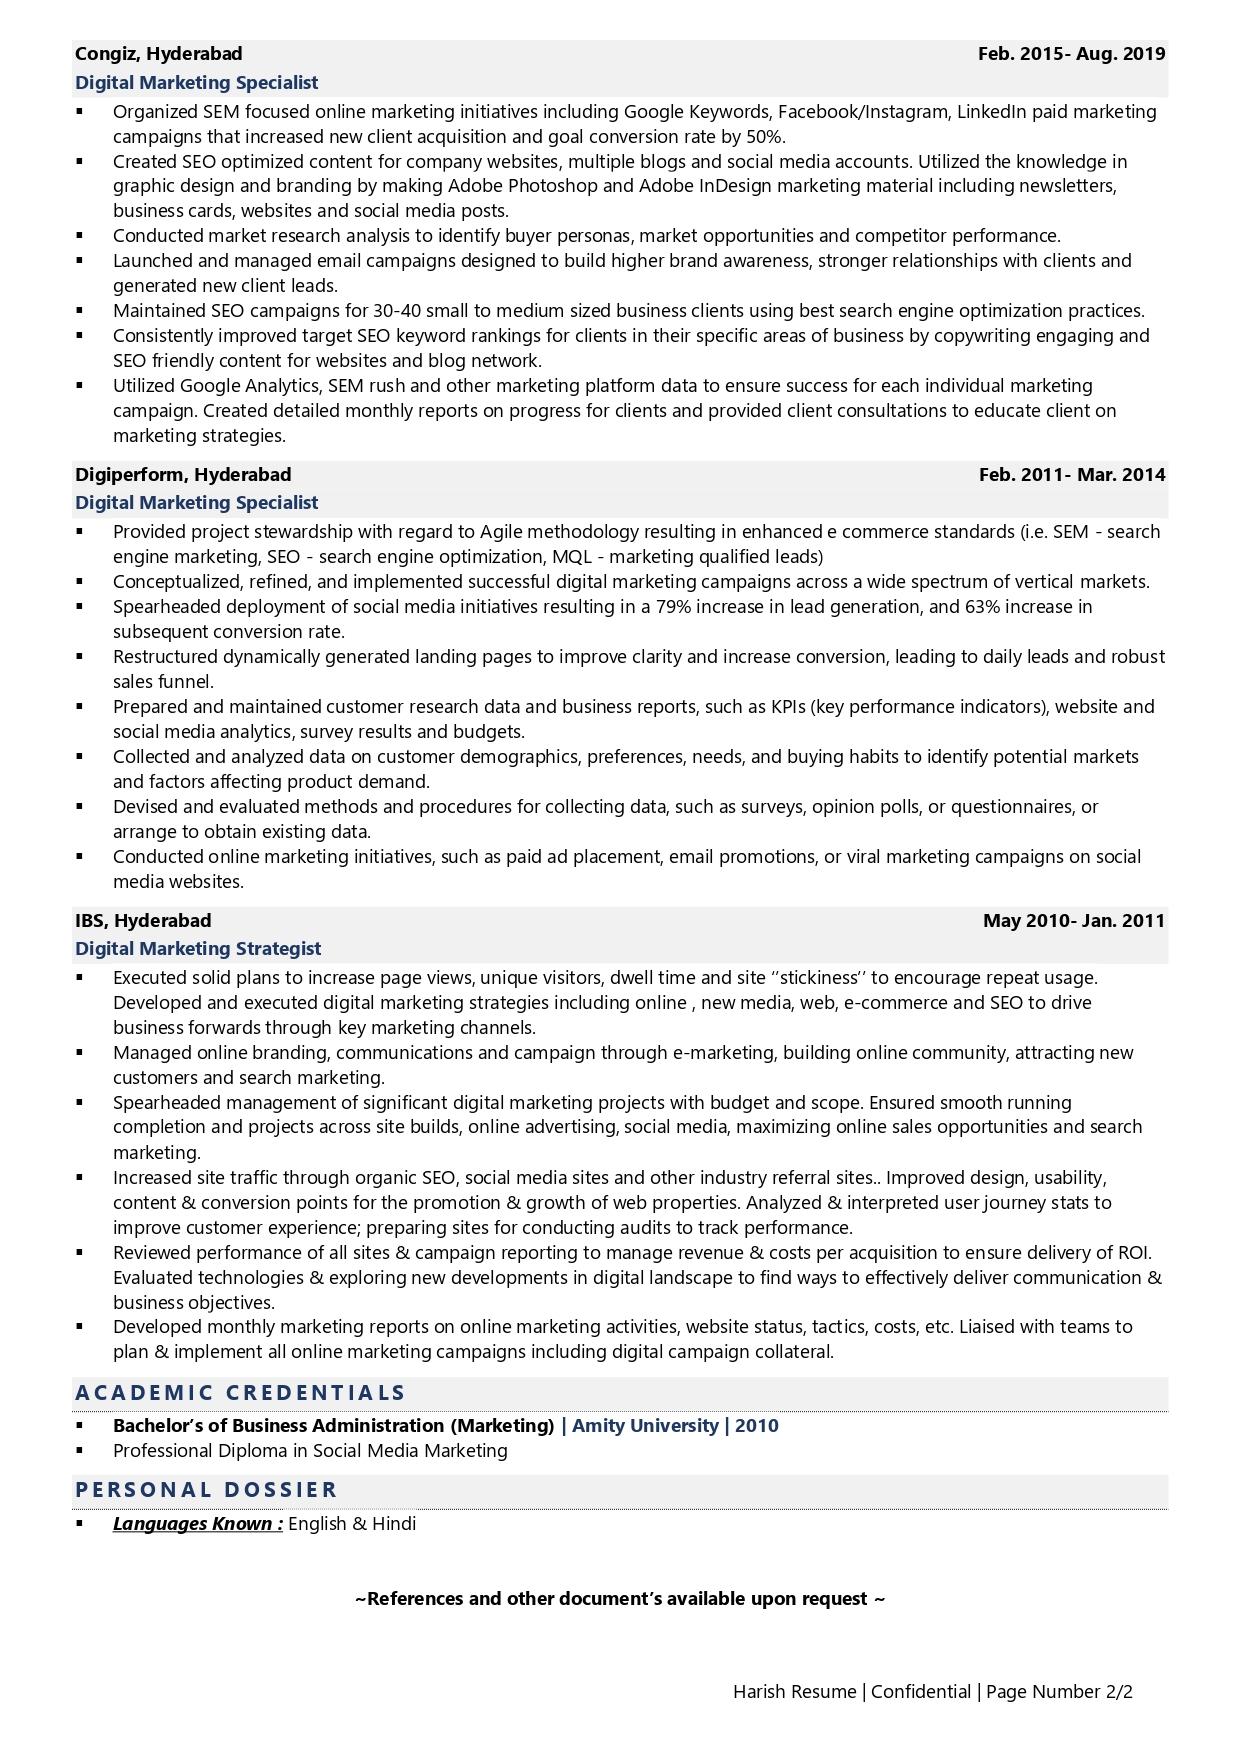 Digital Marketing Manager - Resume Example & Template